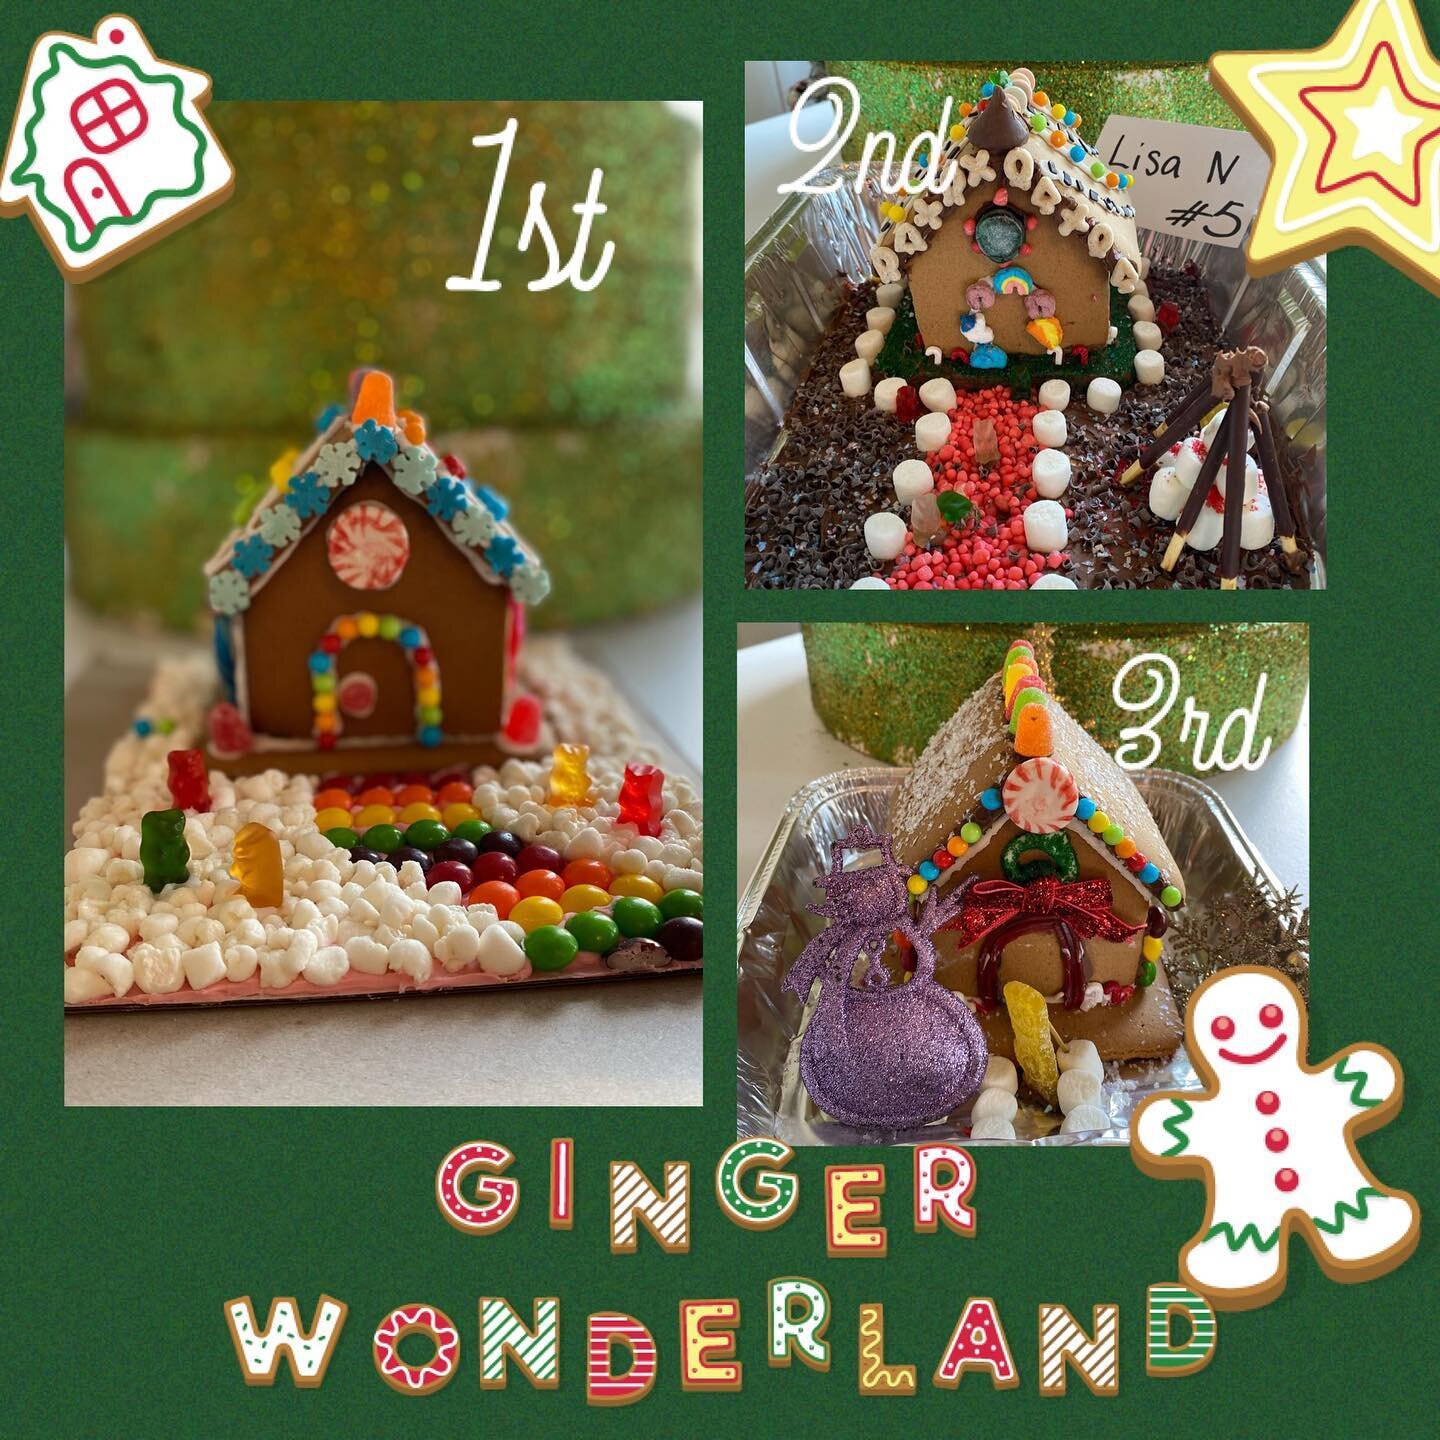 Hollering, &ldquo;Great Job&rdquo; to all the families that joined the gingerbread contest. Here are our winners!
Specials thanks to our judges, @christopher_may_catering  and @queen_perez_  two of Kissimmee&rsquo;s finest bakers!